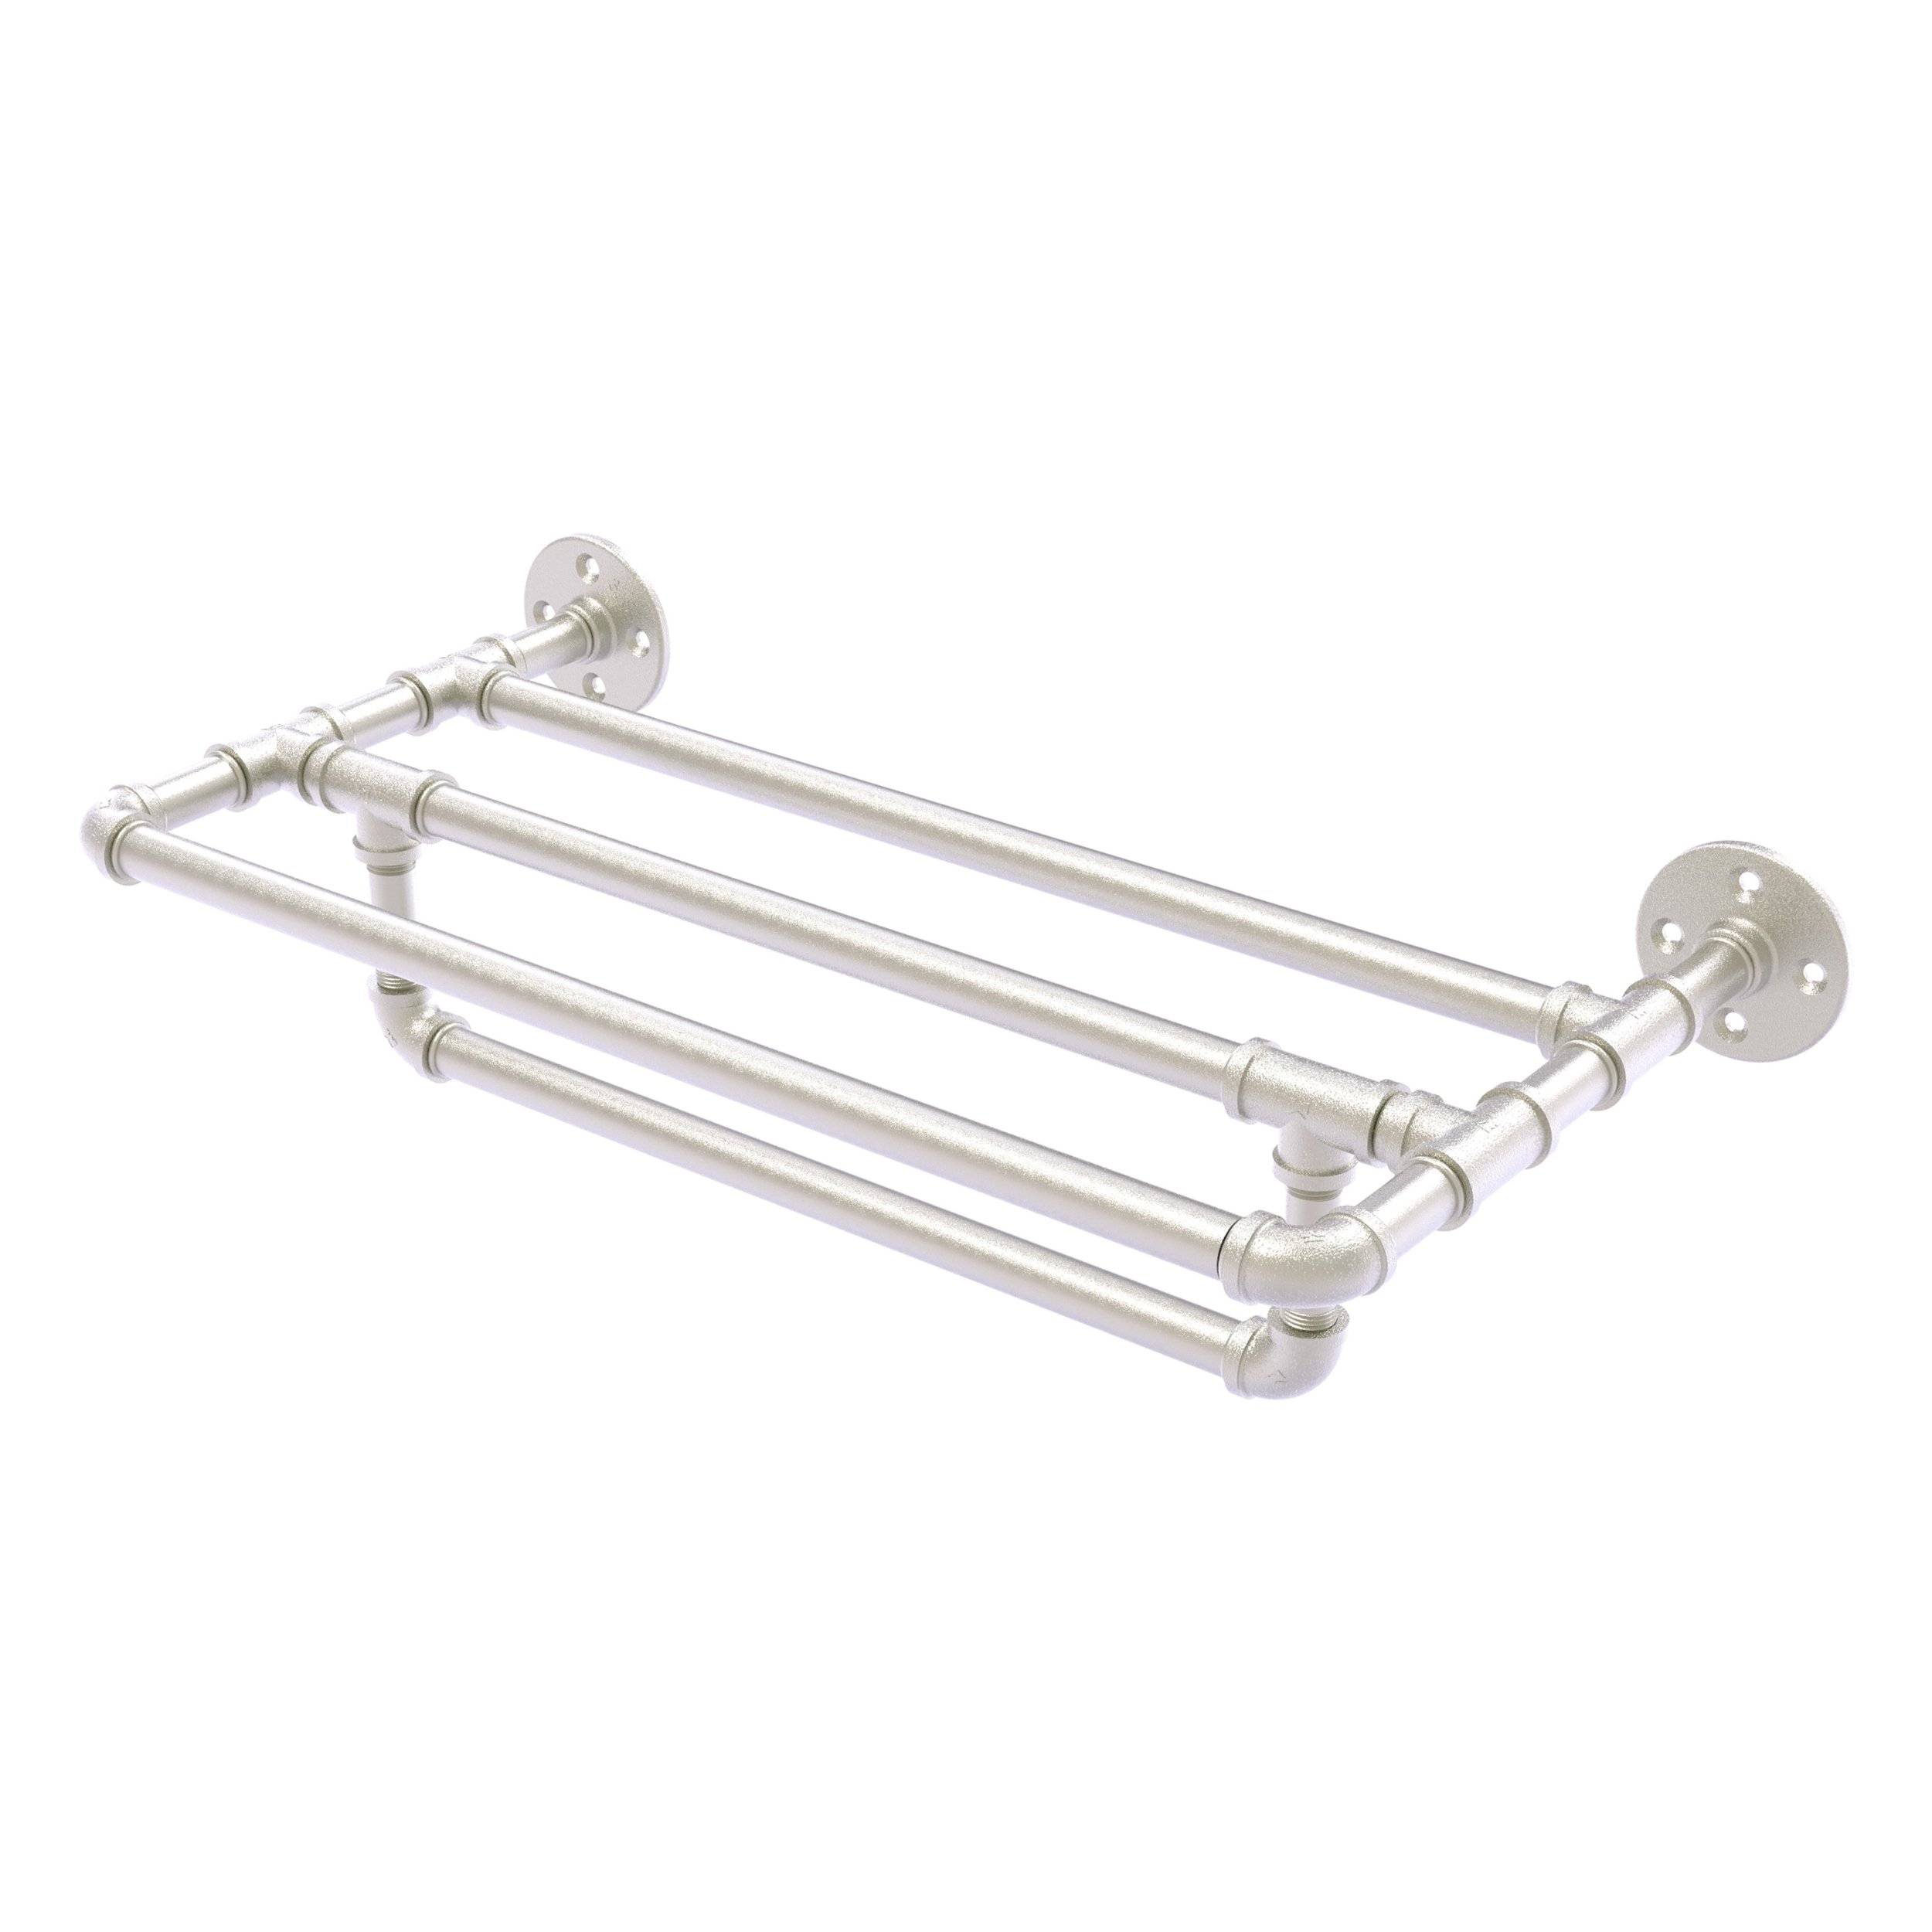 Allied Brass Pipeline 30'' Wall Mounted Towel Shelf with Towel Bar in Satin Nickel - image 1 of 7